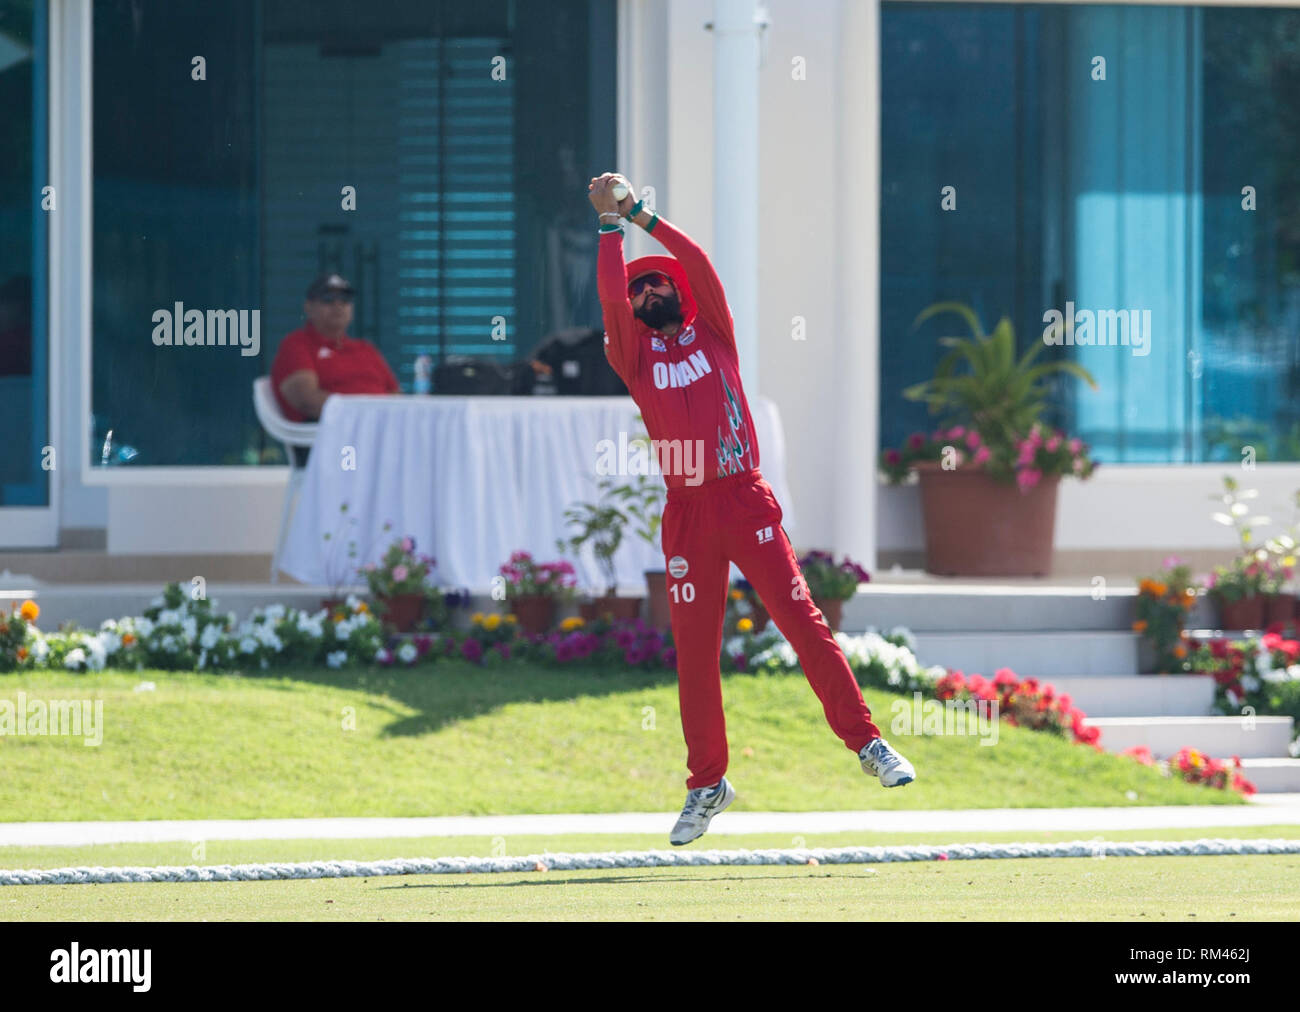 Muscat, Oman. 13th Feb, 2019. Pic shows: Great catch on the boundary by Oman's Jatinder Singh, to dismiss Ireland's Andrew Balbirnie for 34 as Ireland take on Oman on the first day of the Oman Quadrangular Series. Credit: Ian Jacobs/Alamy Live News Stock Photo